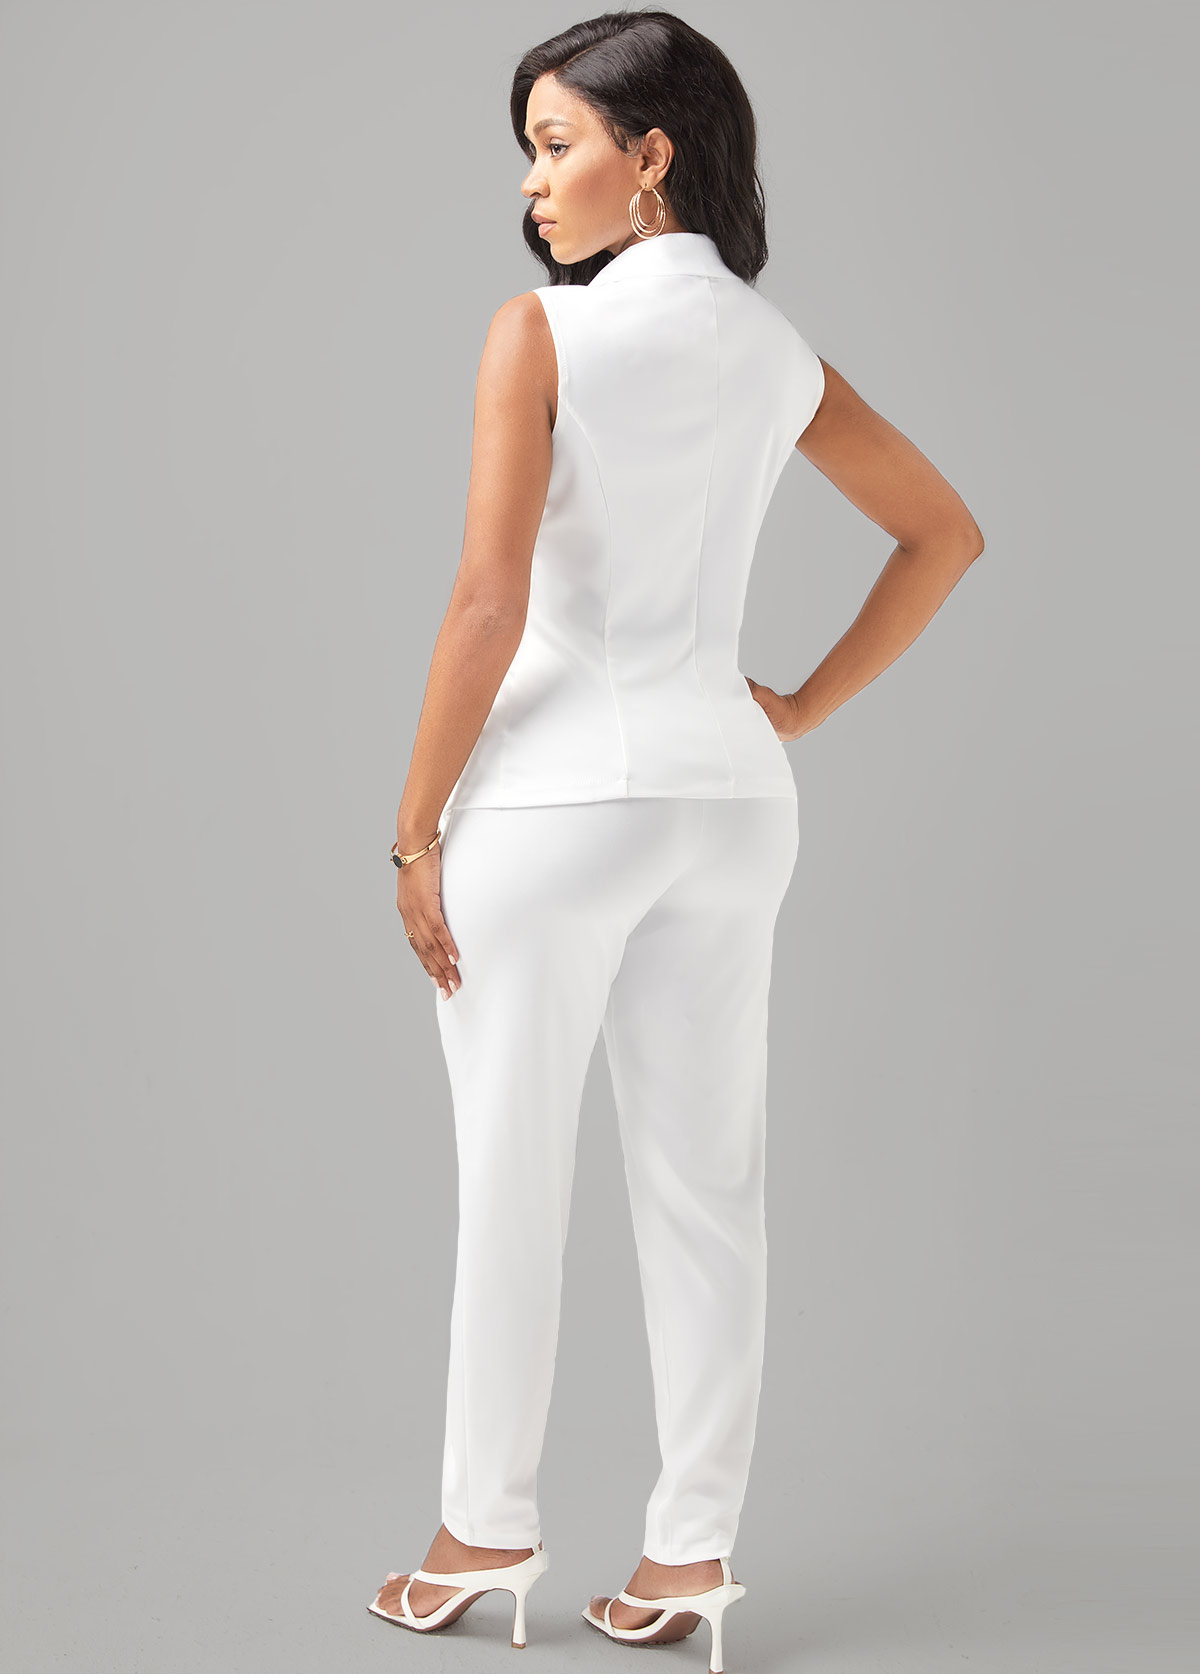 Notch Neck Double Breasted Sleeveless Two Piece Set